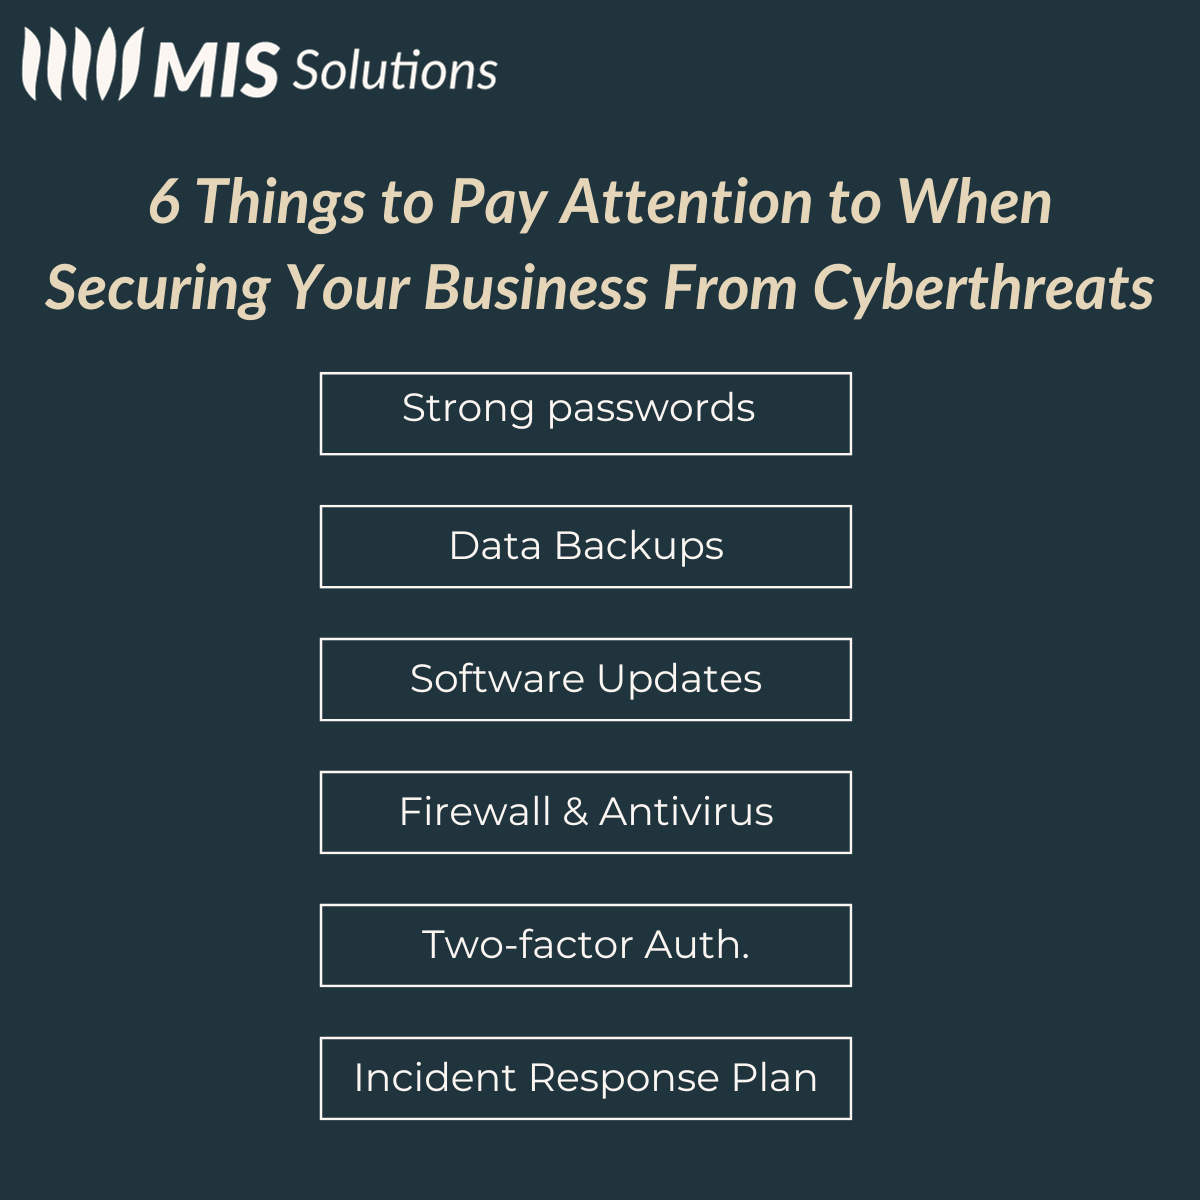 6 Things to Pay Attention to When Securing Your Business From Cyberthreats